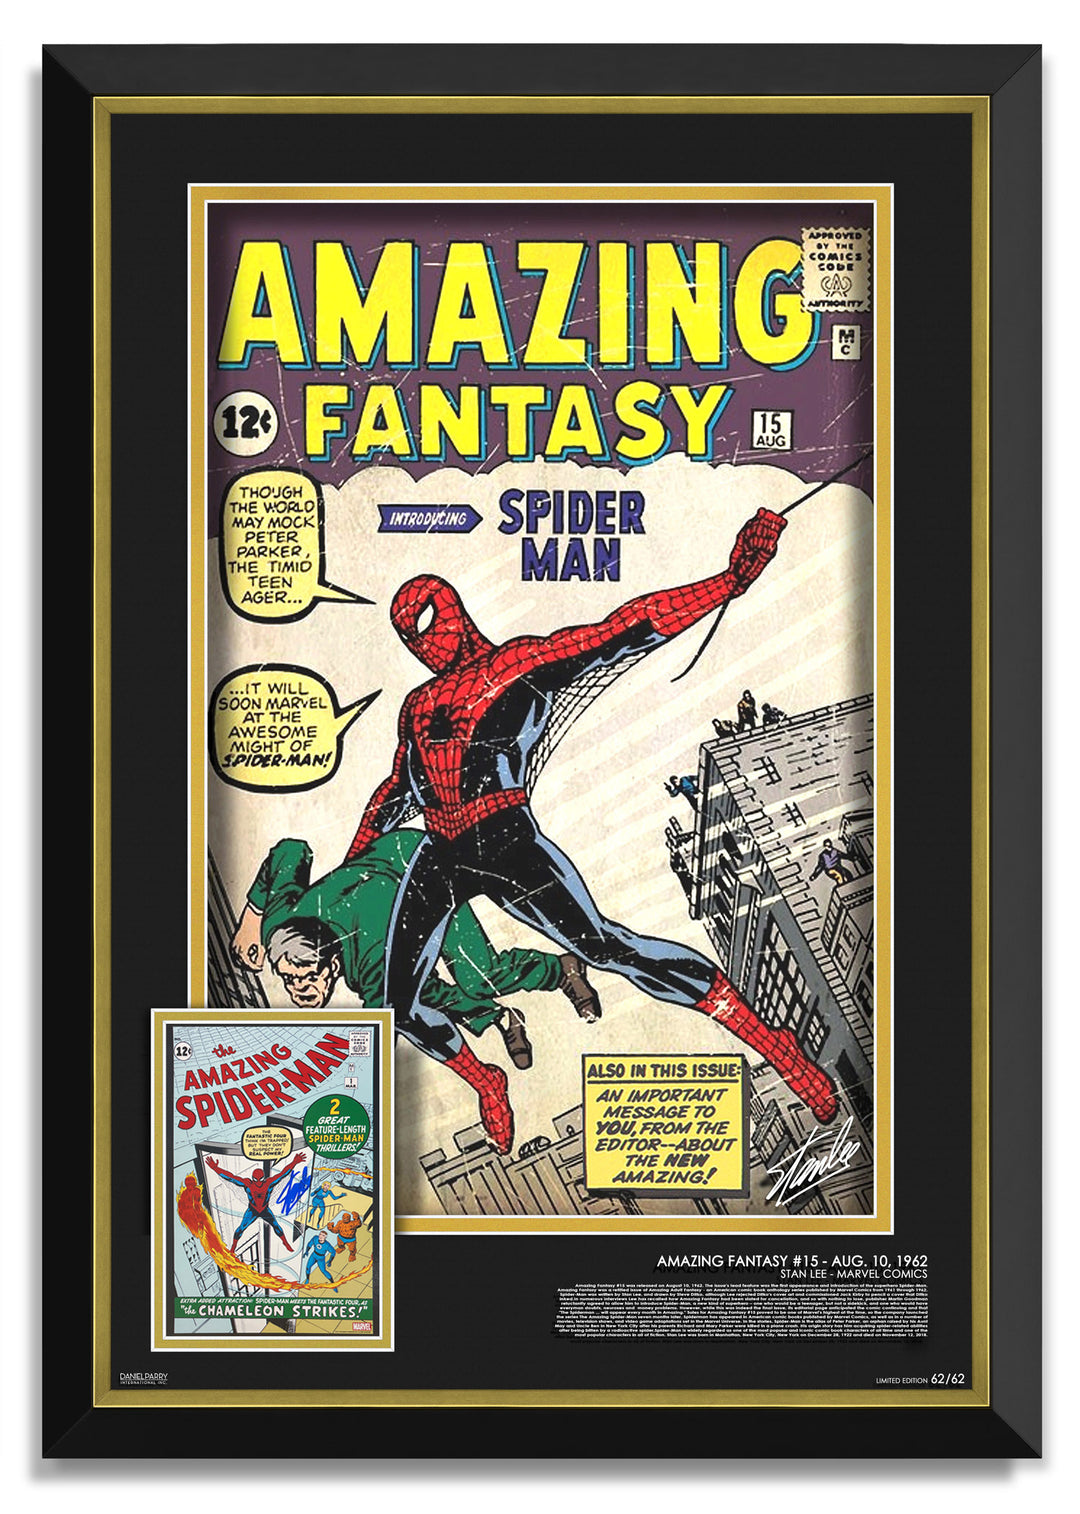 Limited Edition #62/62 Stan Lee Signed Framed Print - Spider-Man First Comic, Marvel, Pop Culture Art, Comics, Autographed, Signed, AAOCC33097